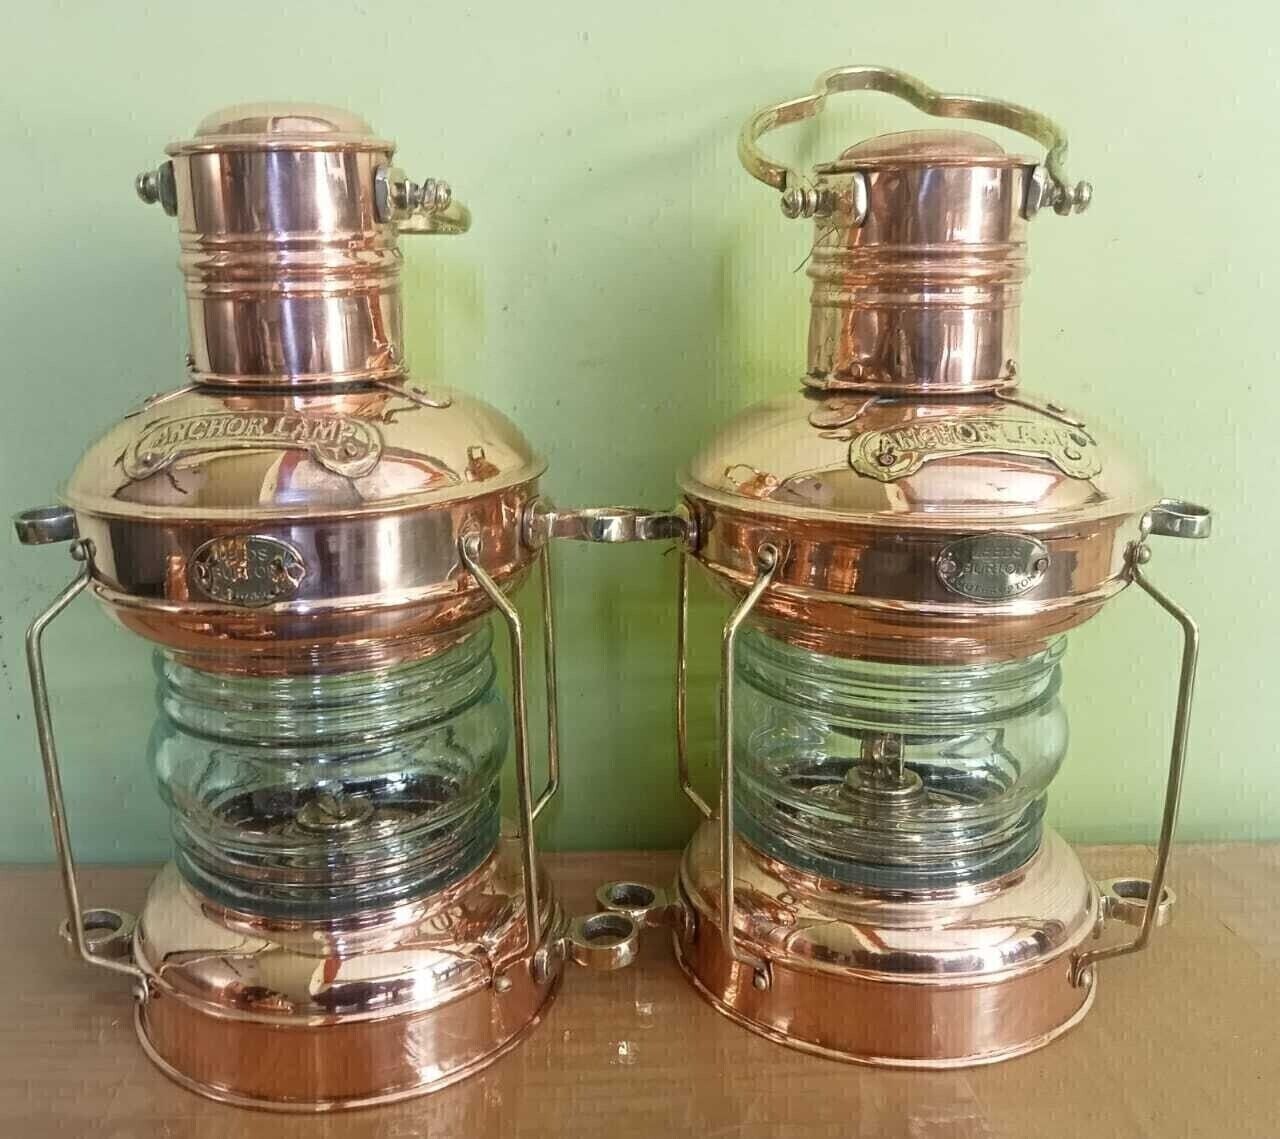 Copper & Brass Anchor Oil Lamp With Fast delivery Maritime Ship Lantern 2 Unit